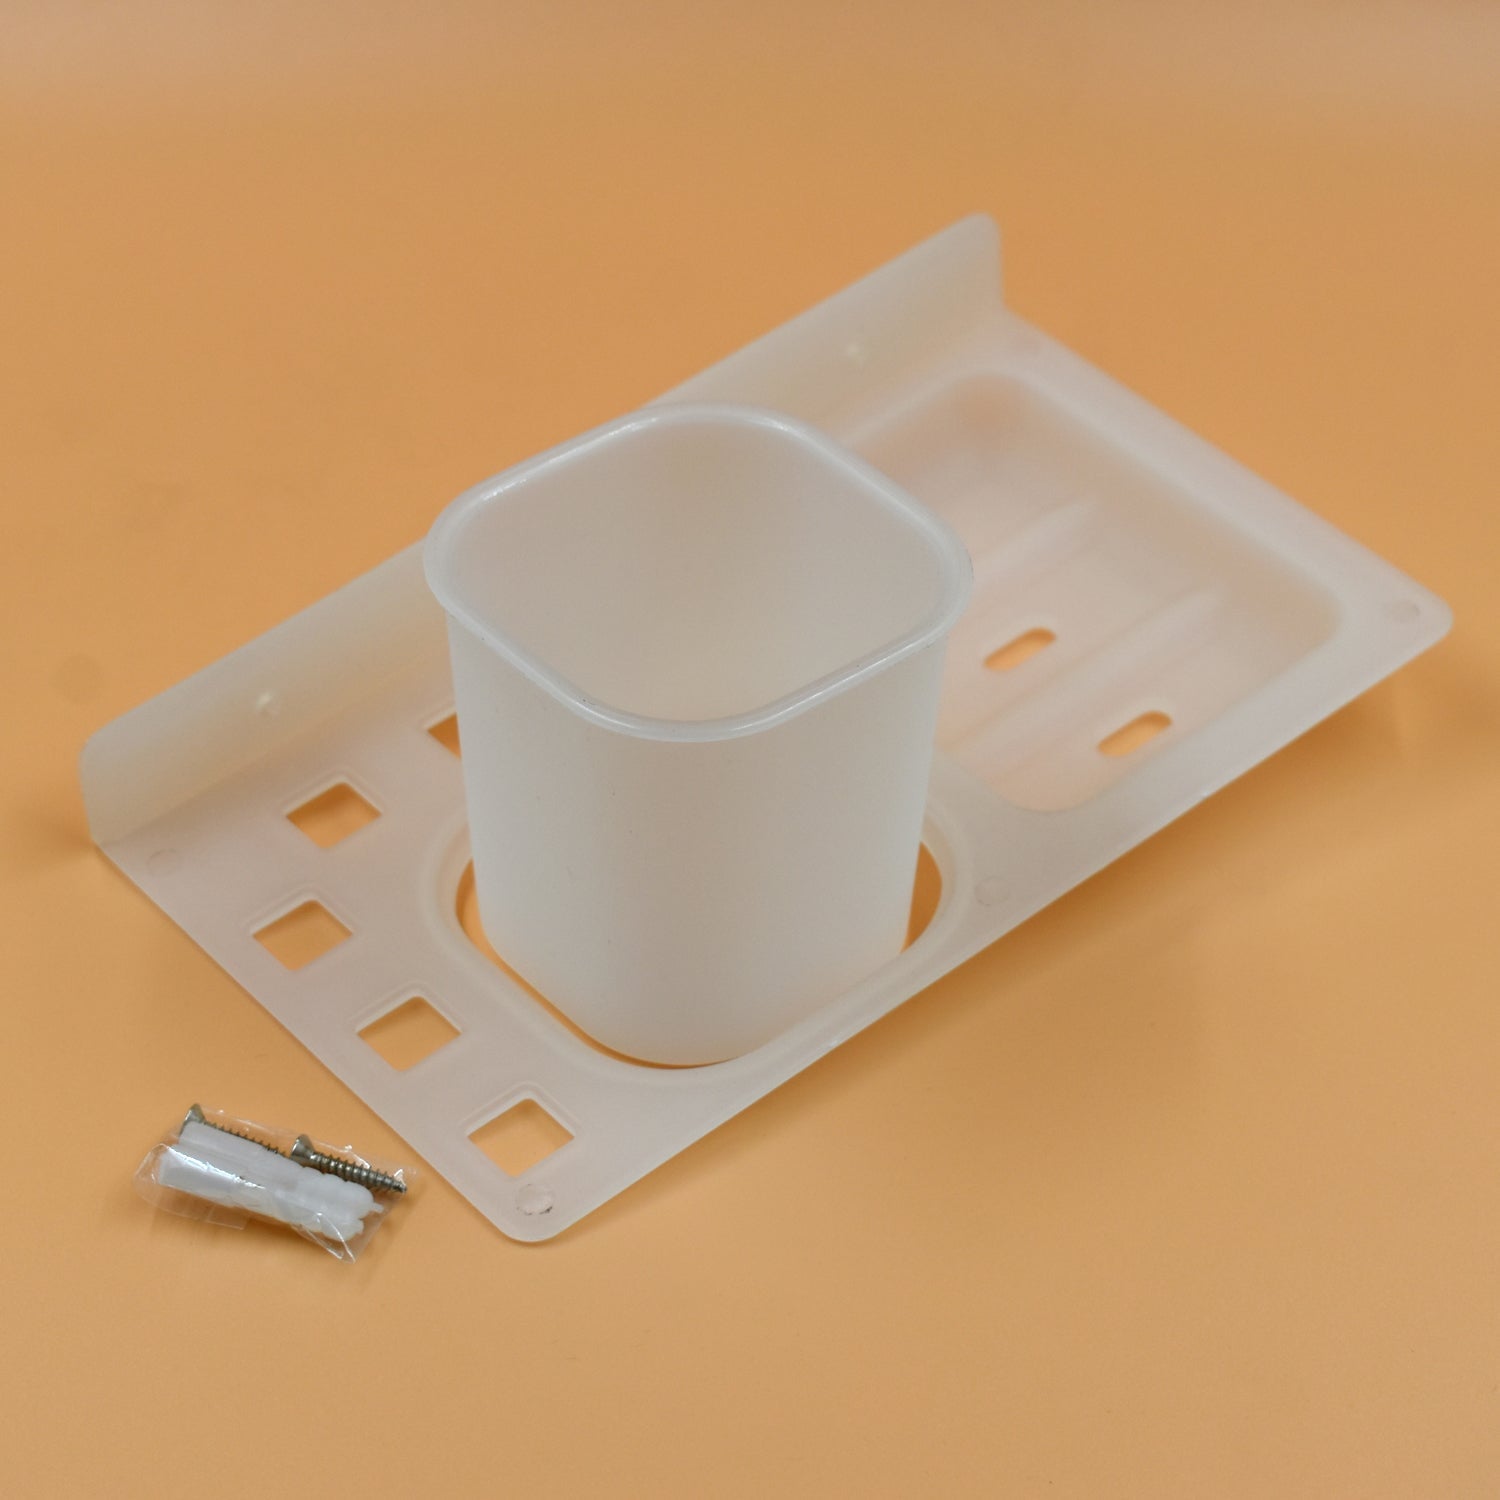 4776 3 in 1 Plastic Soap Dish and plastic soap dish tray used in bathroom and kitchen purposes.